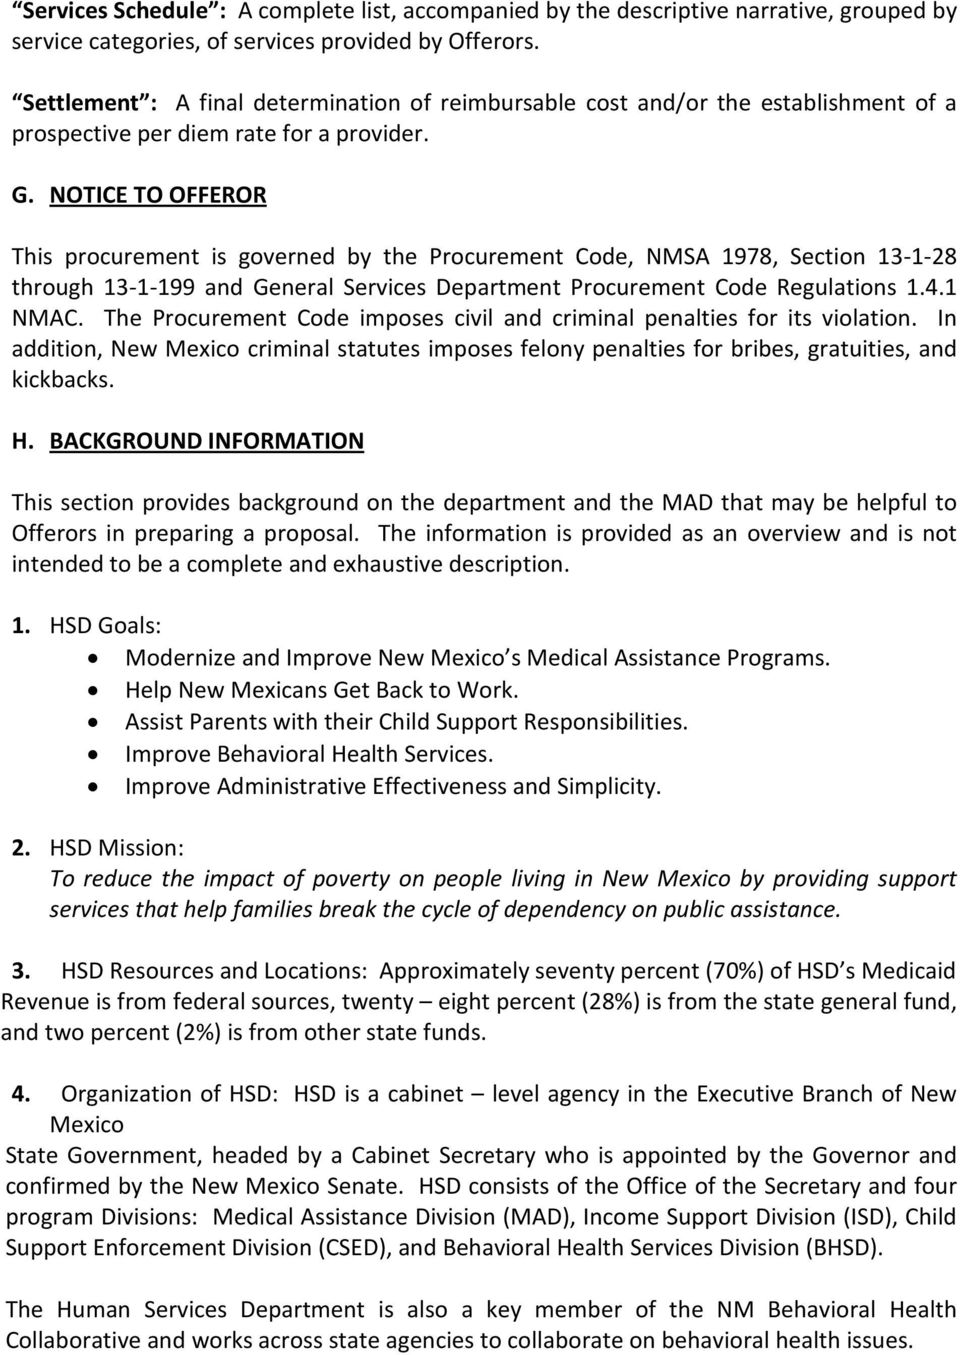 NOTICE TO OFFEROR This procurement is governed by the Procurement Code, NMSA 1978, Section 13-1-28 through 13-1-199 and General Services Department Procurement Code Regulations 1.4.1 NMAC.